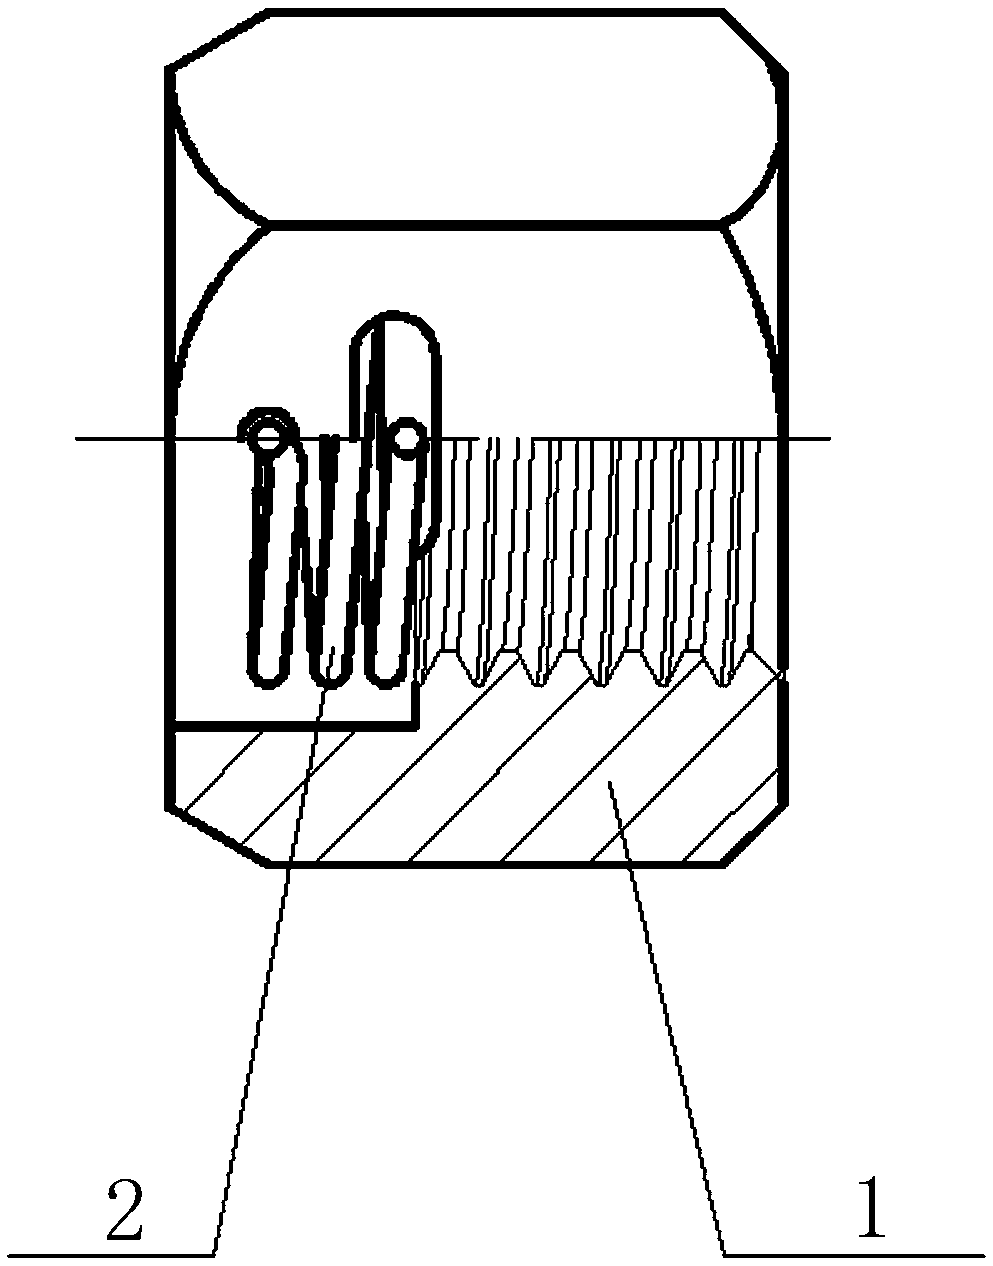 Self-locking nut with self-fixing spring